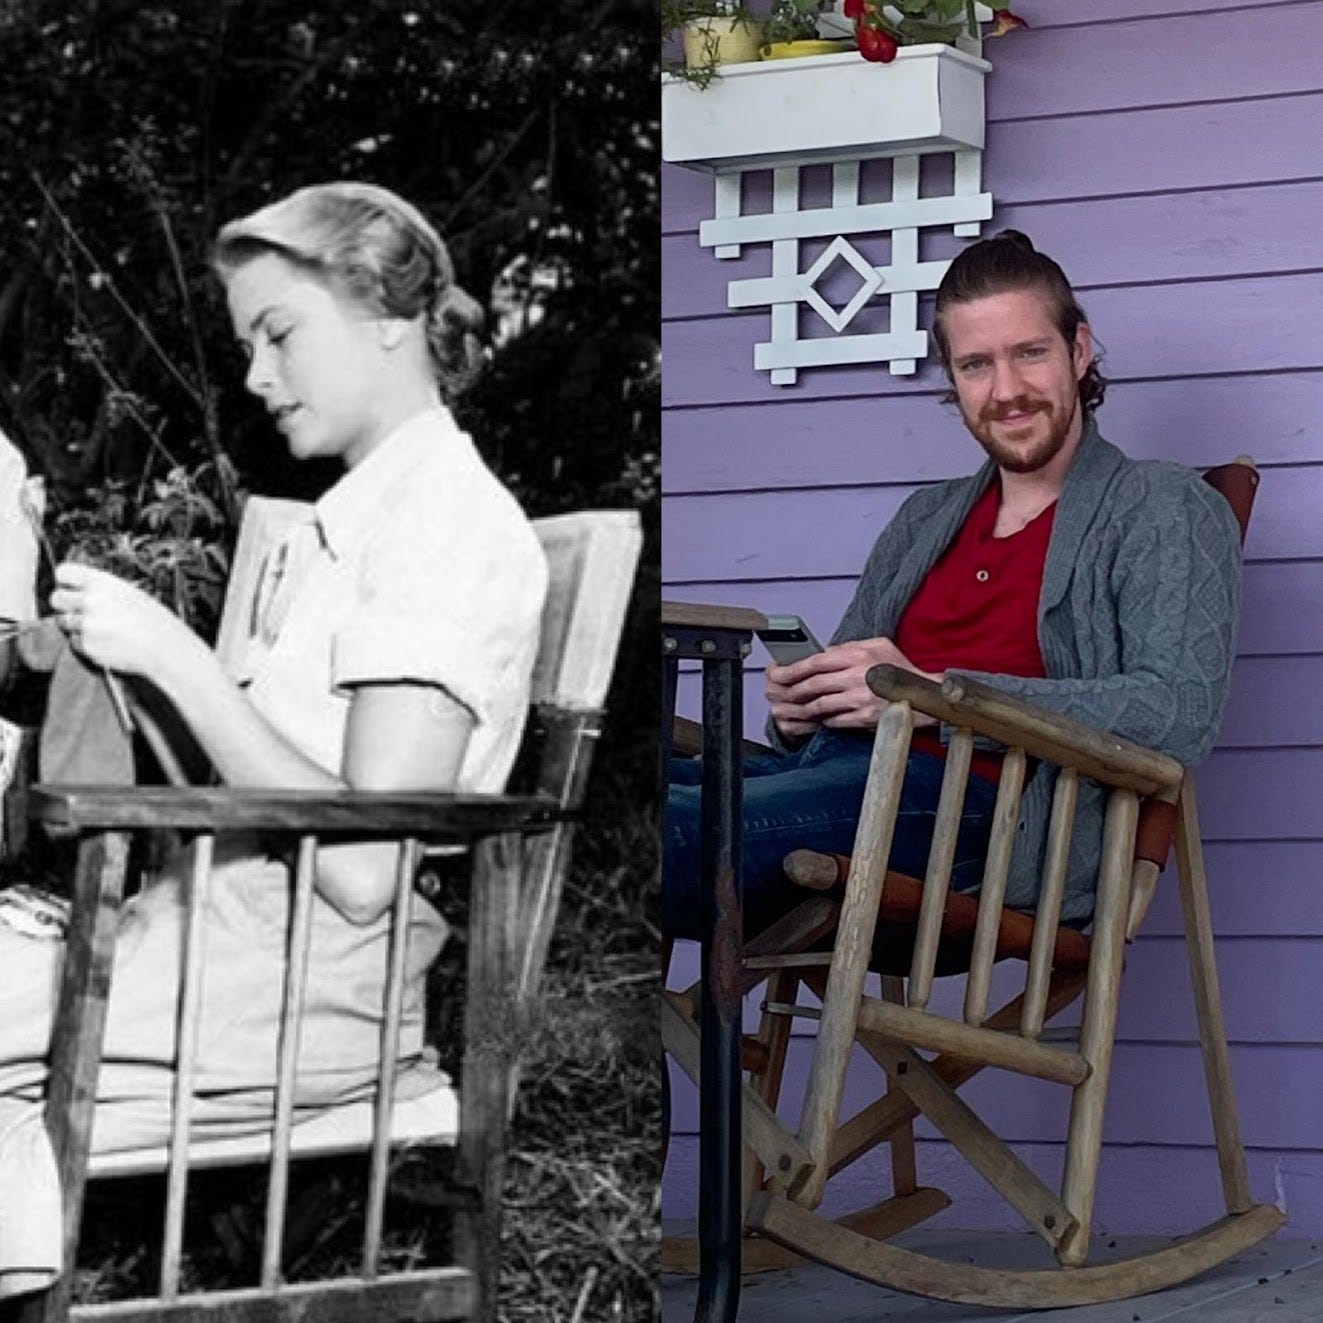 A black and white picture of Grace Kelly knitting in a rocking chair next to a color picture of a white bearded young man using his phone in a rocking chair